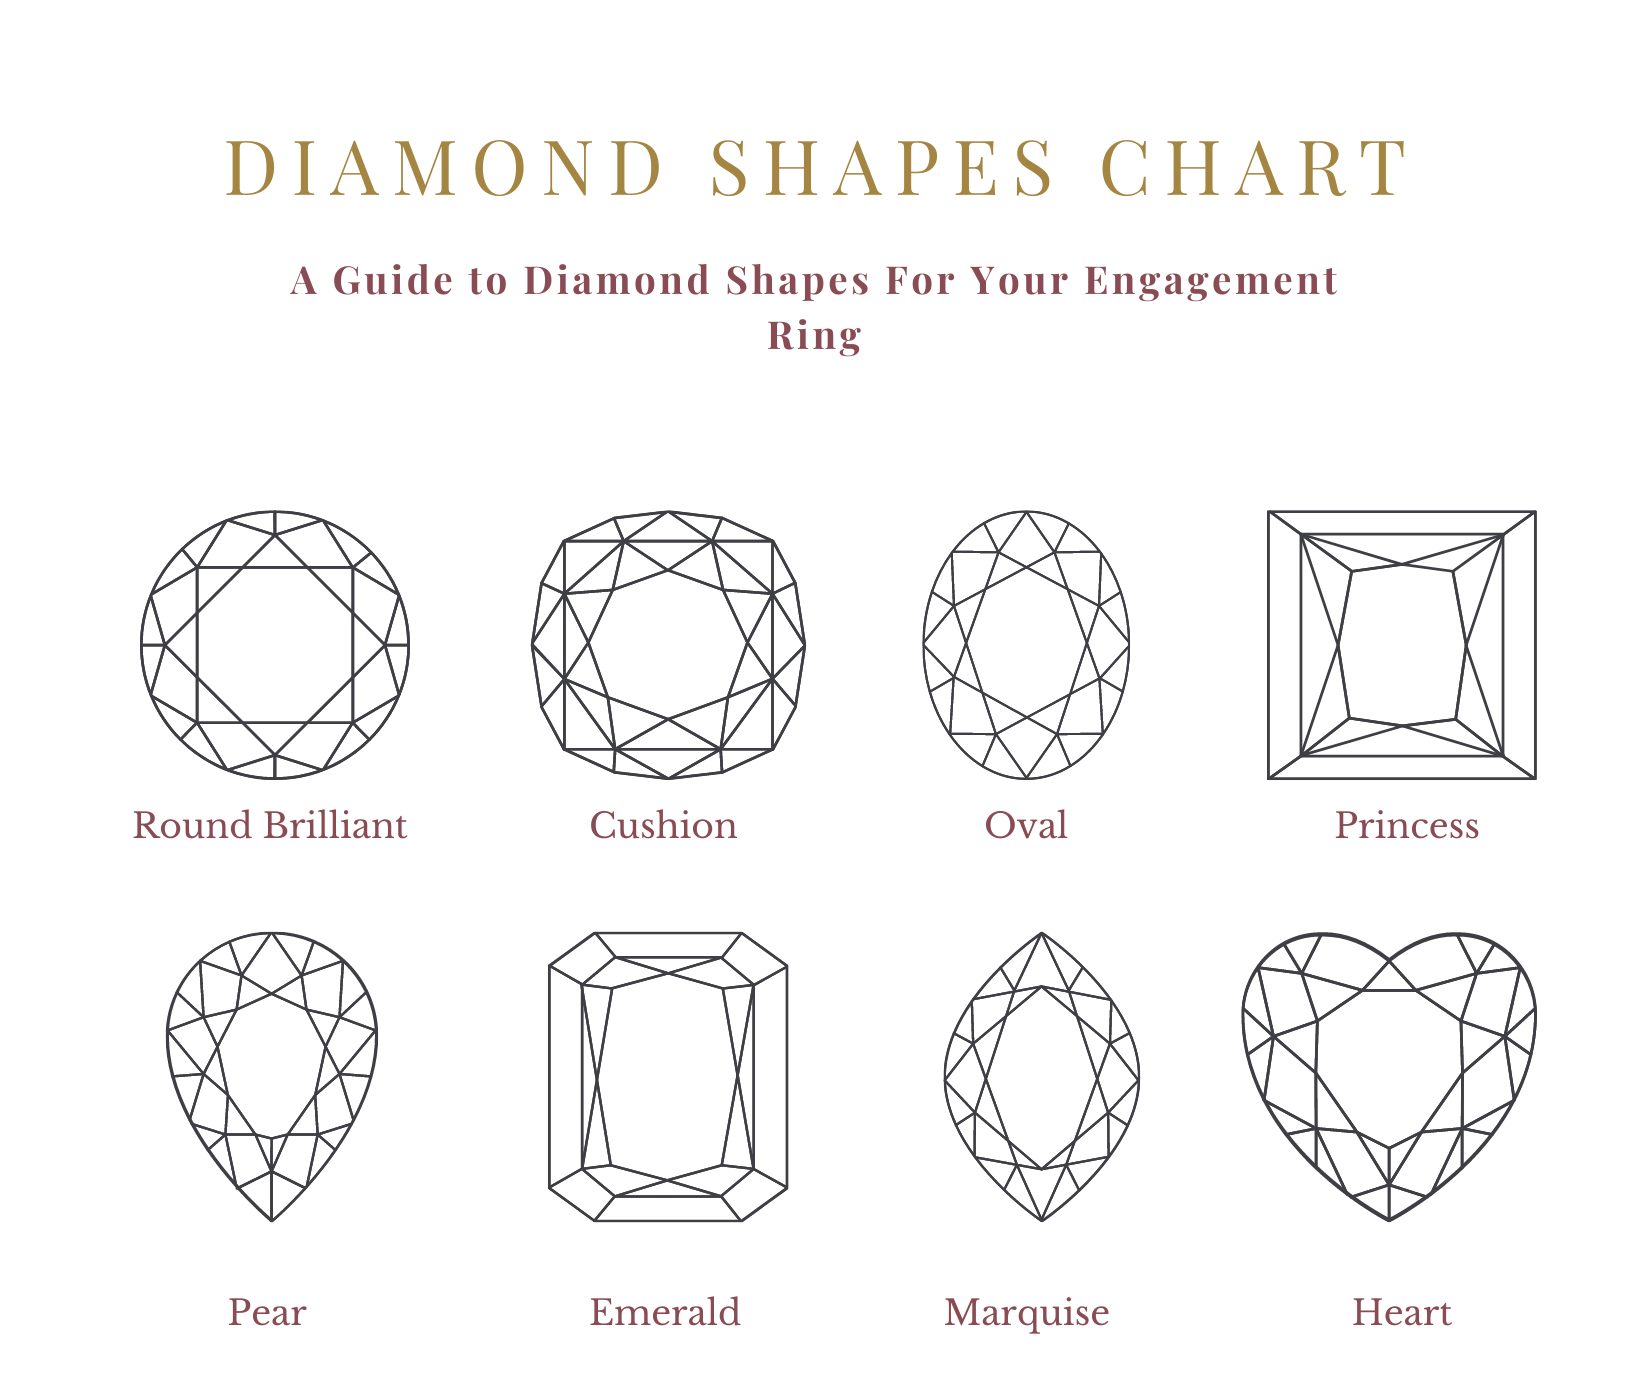 Diamond Shapes Chart - Guide to Buying an Engagement Ring